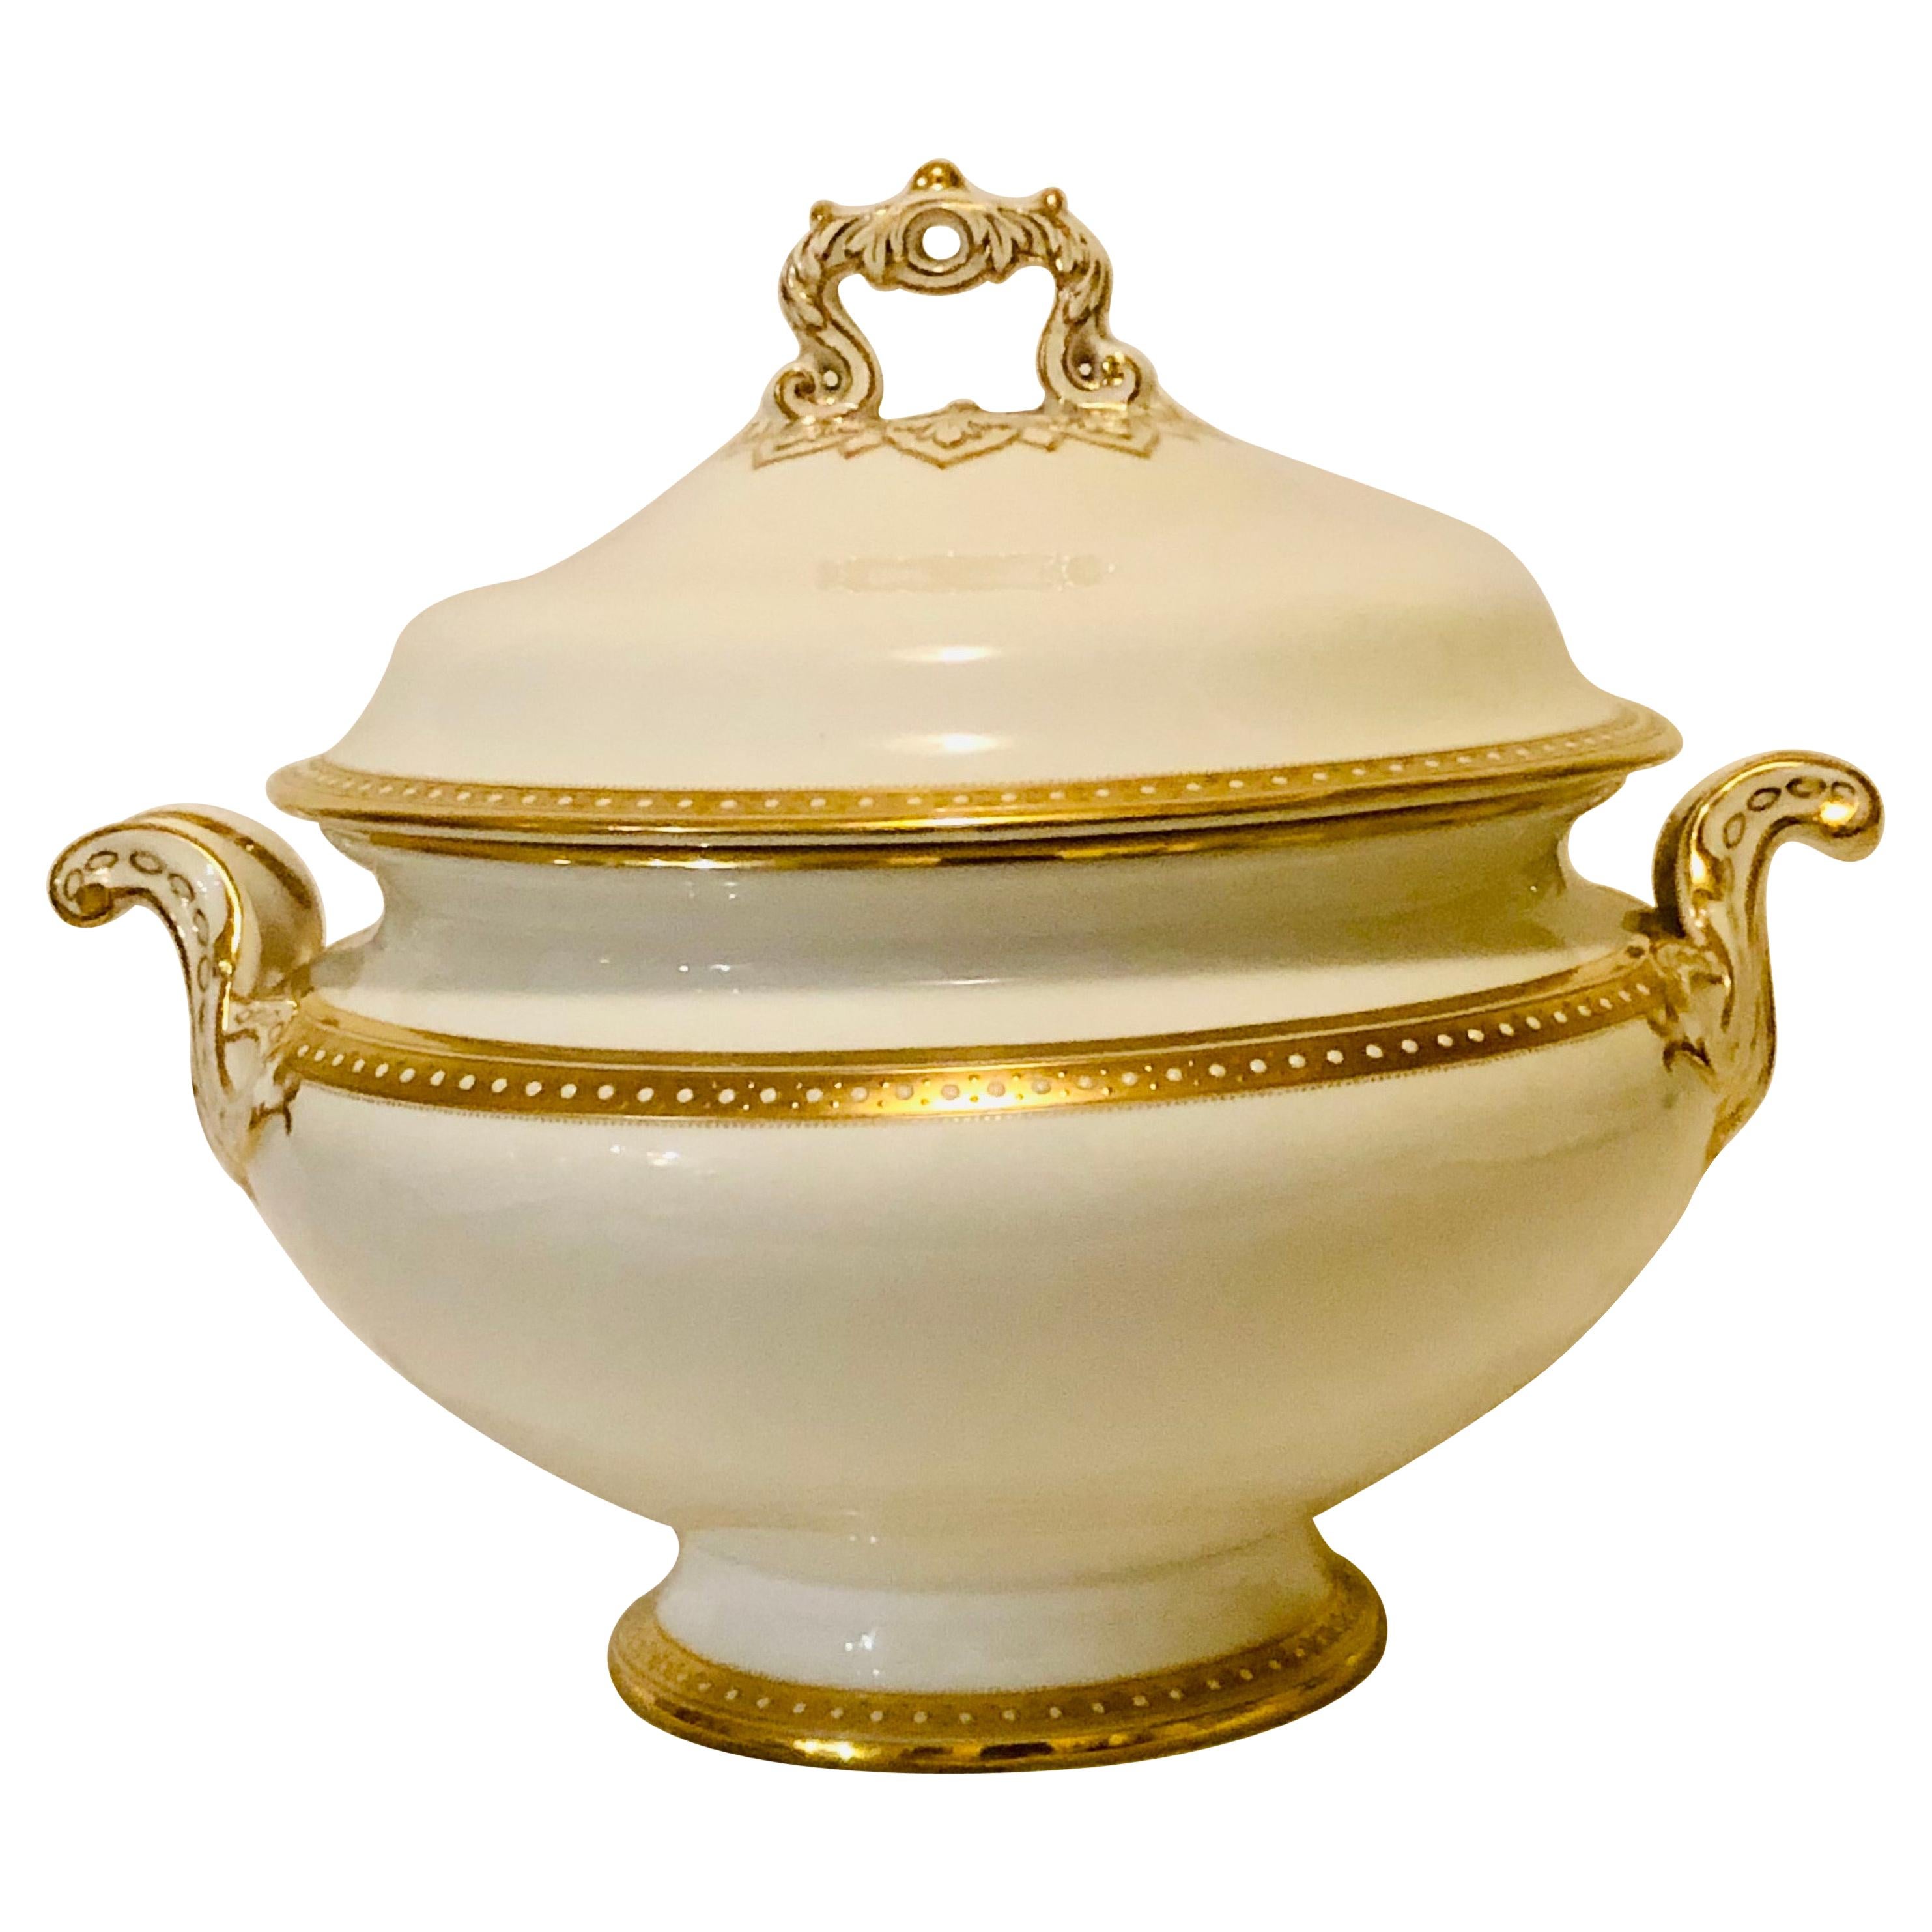 Copeland Spode Soup Tureen with Gold Border and White Jeweling Made for T. Goode